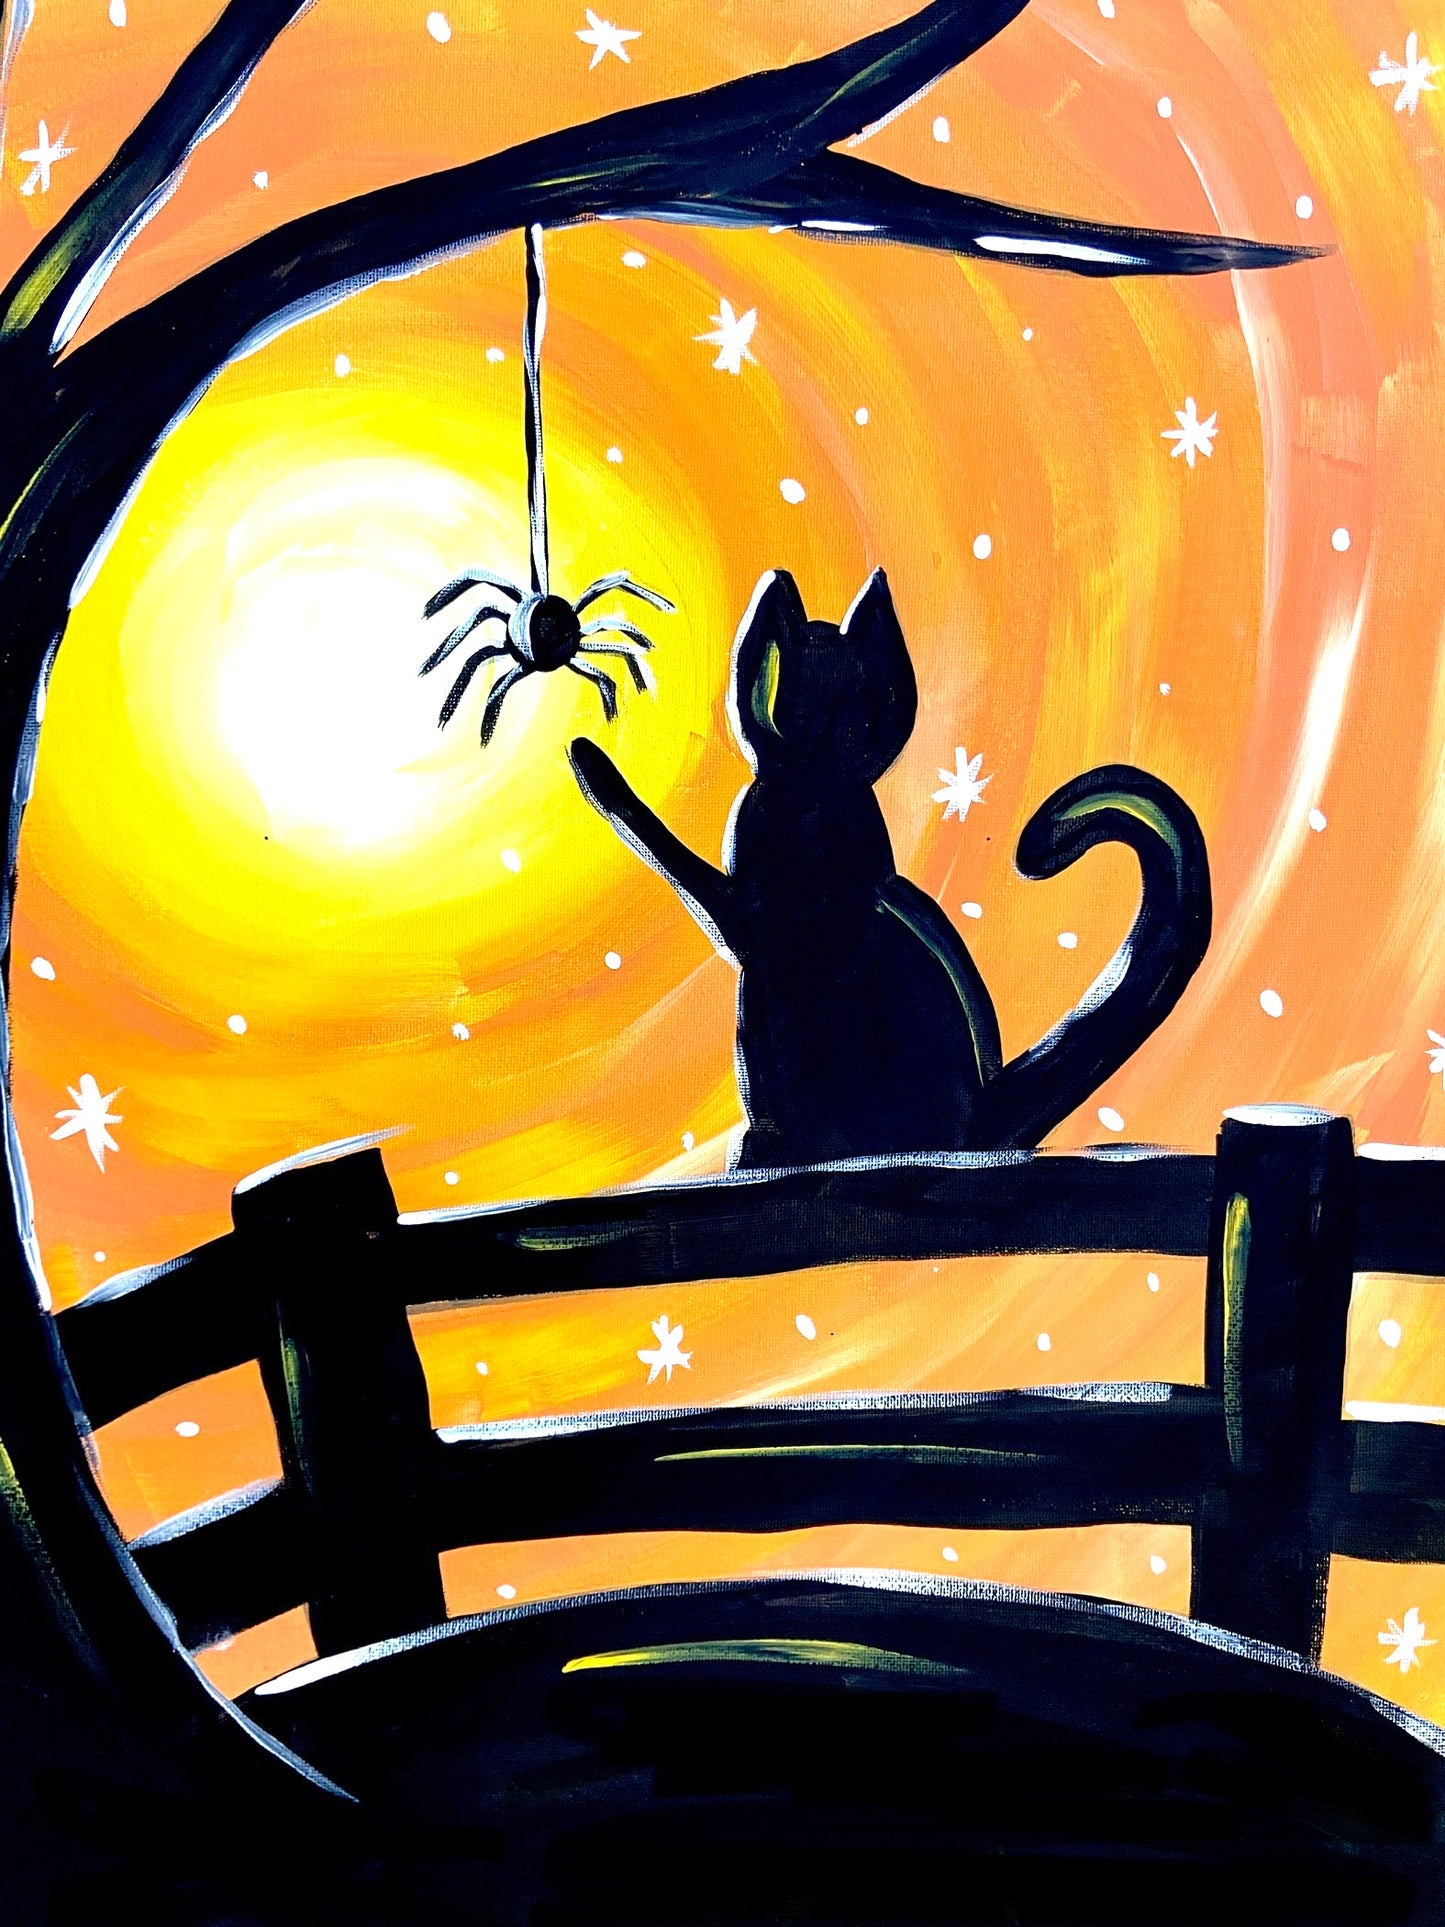 Halloween Black Cat & Spider Canvas Complete Art Kit! At home Black Cat & Spider DIY Art Kit! At Home Halloween Paint Party! Great For Beginners!